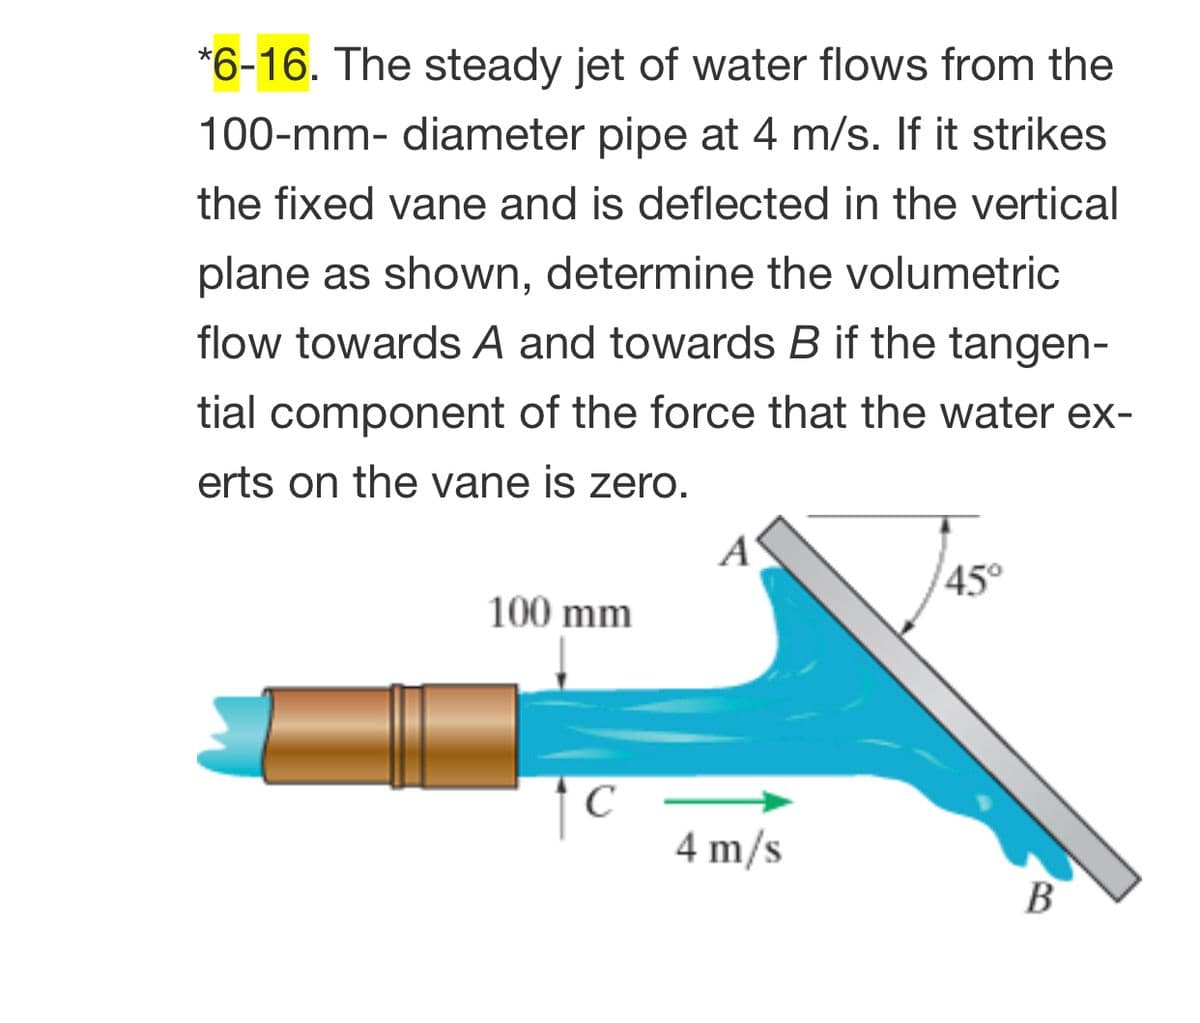 *6-16. The steady jet of water flows from the
100-mm- diameter pipe at 4 m/s. If it strikes
the fixed vane and is deflected in the vertical
plane as shown, determine the volumetric
flow towards A and towards B if the tangen-
tial component of the force that the water ex-
erts on the vane is zero.
A
45°
100 mm
C
4 m/s
В
